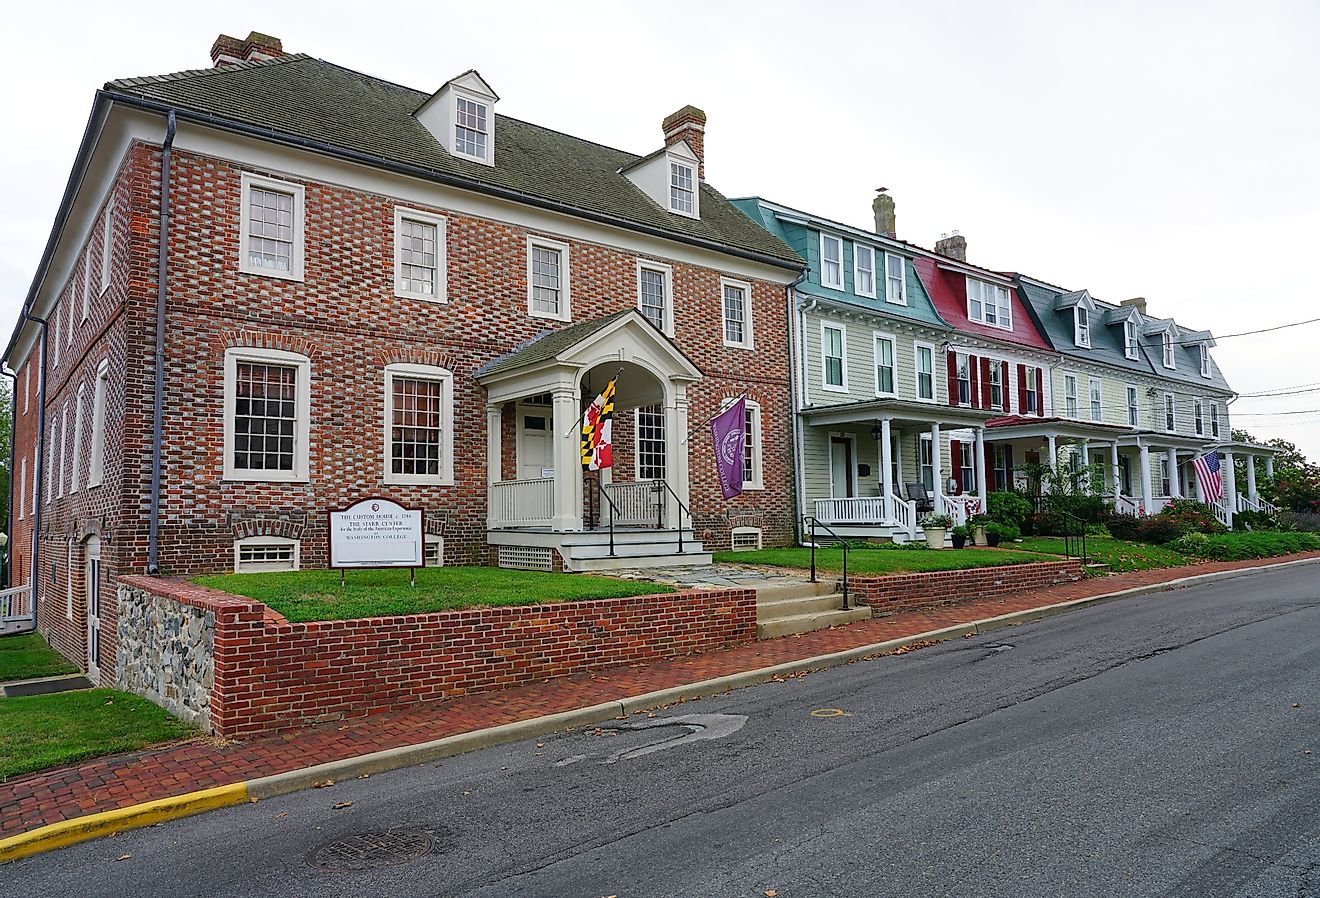 View of historic buildings in the town of Chestertown, Maryland. Image credit EQRoy via Shutterstock